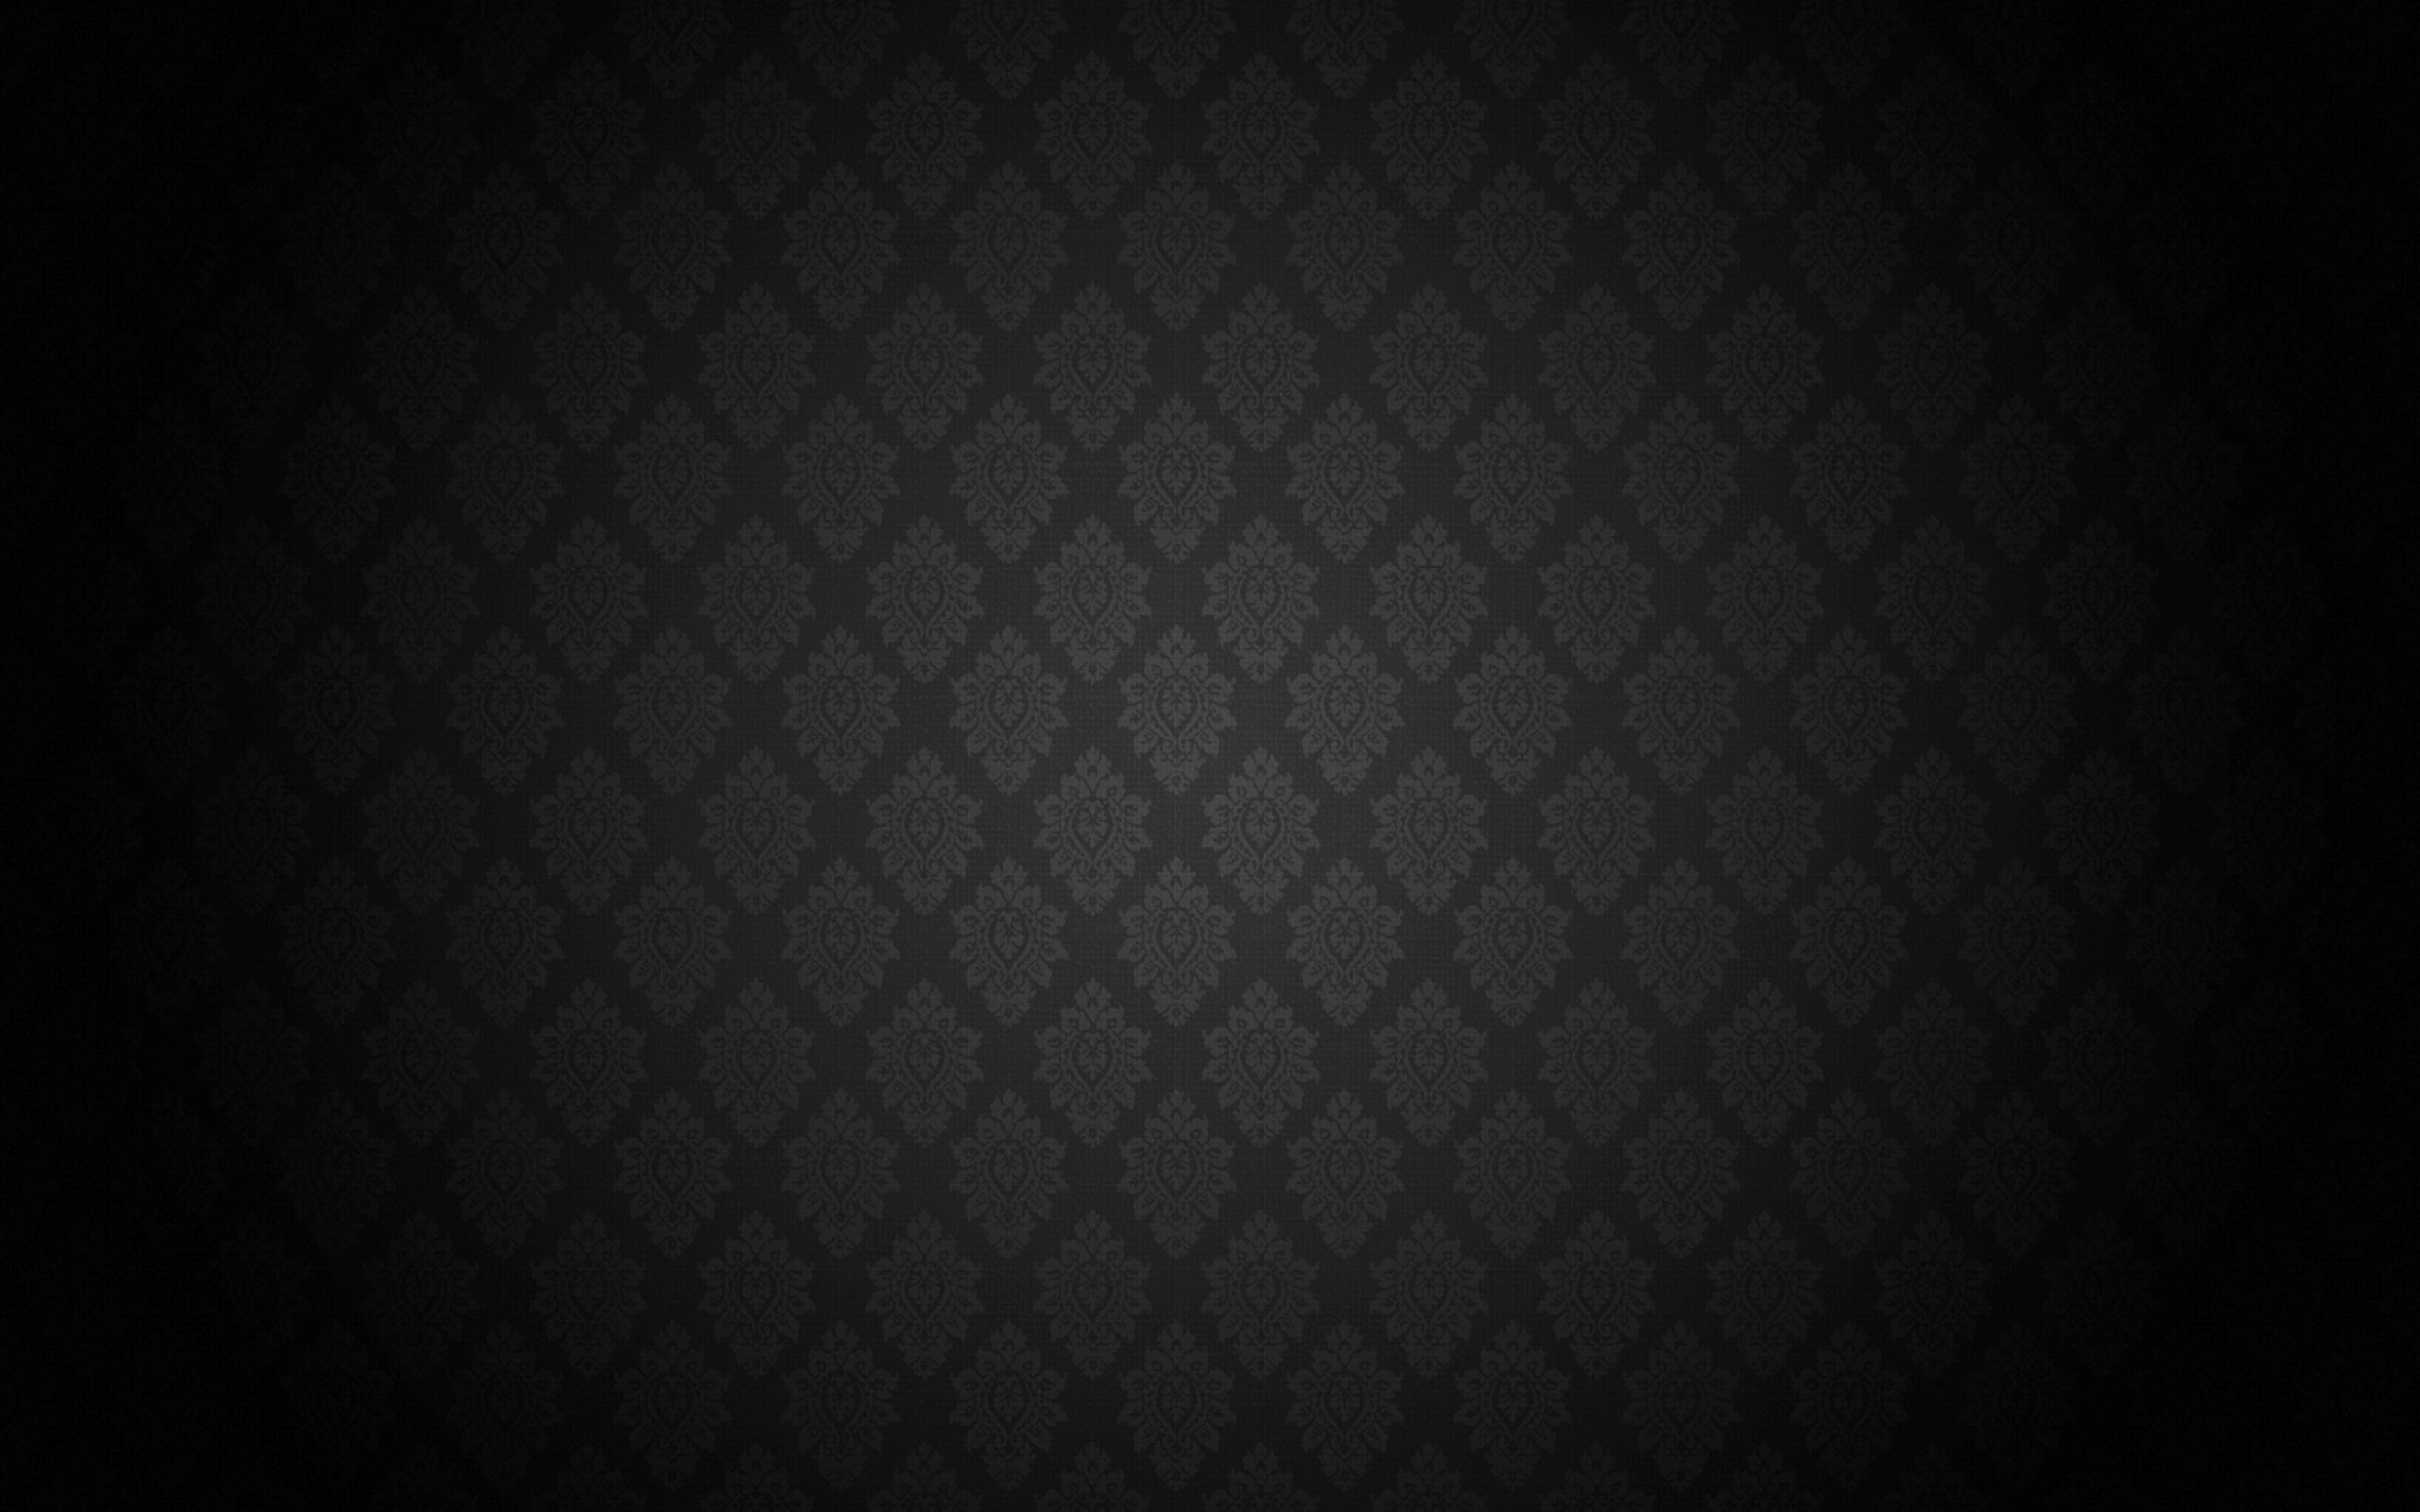 2560x1600 Black and White Pattern Background, wallpaper, Black and White Pattern .